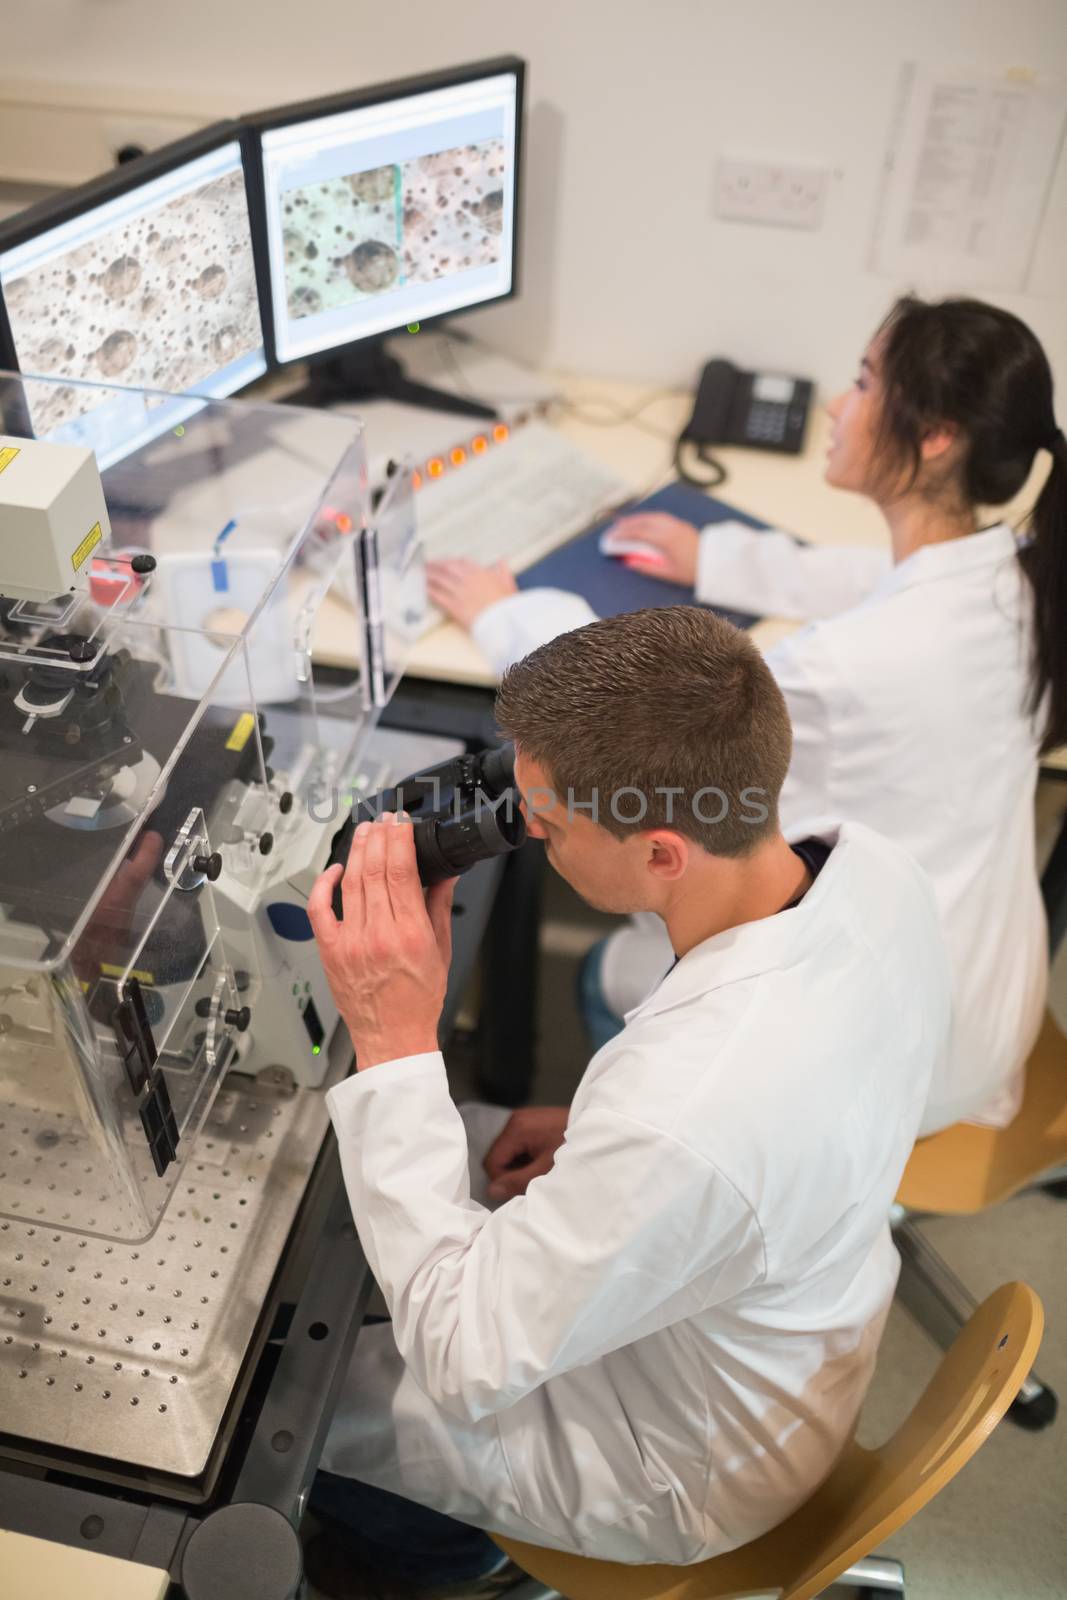 Biochemistry students using large microscope and computer at the university